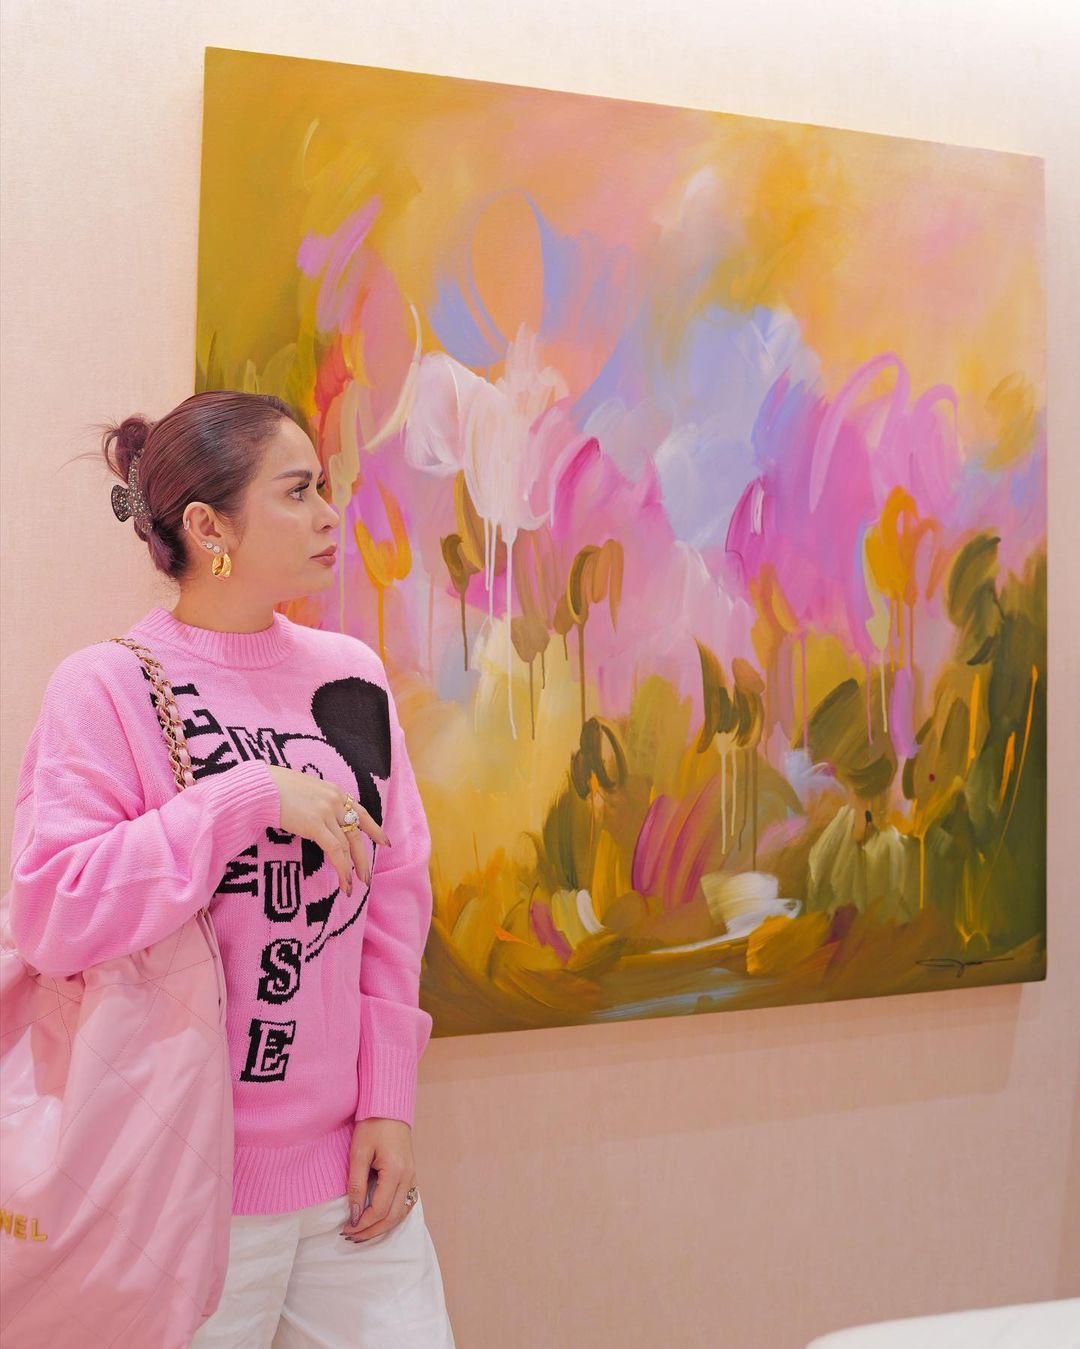 Preview.ph - All of Jinkee Pacquiao's Colorful Designer OOTDs in